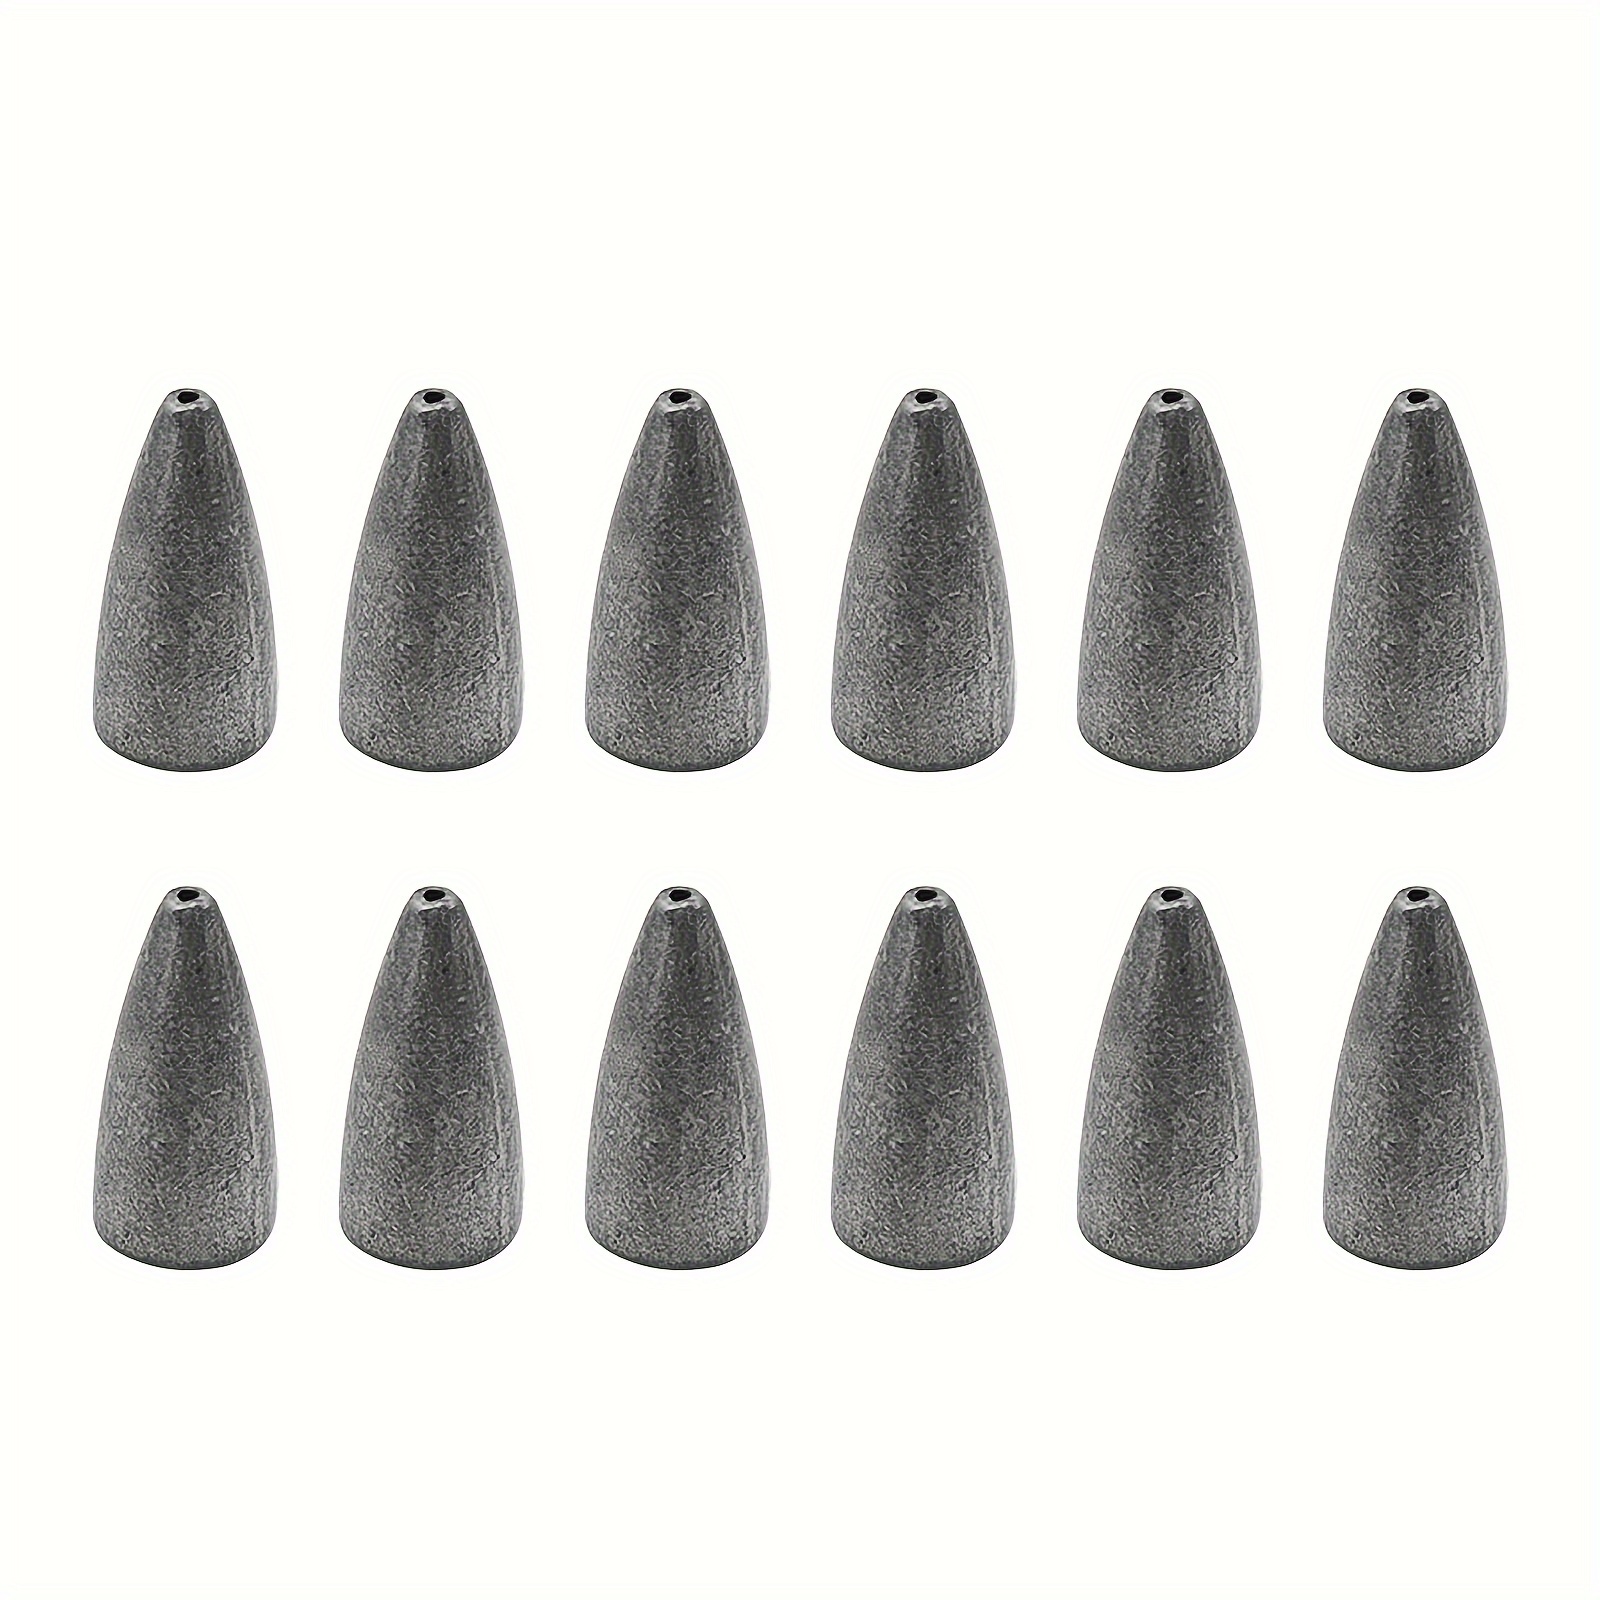 6oz Cannonball Round Fishing Lead Weights - 14 Sinker Weights Fishing  Sinkers Molds for Freshwater or Saltwater Fishing